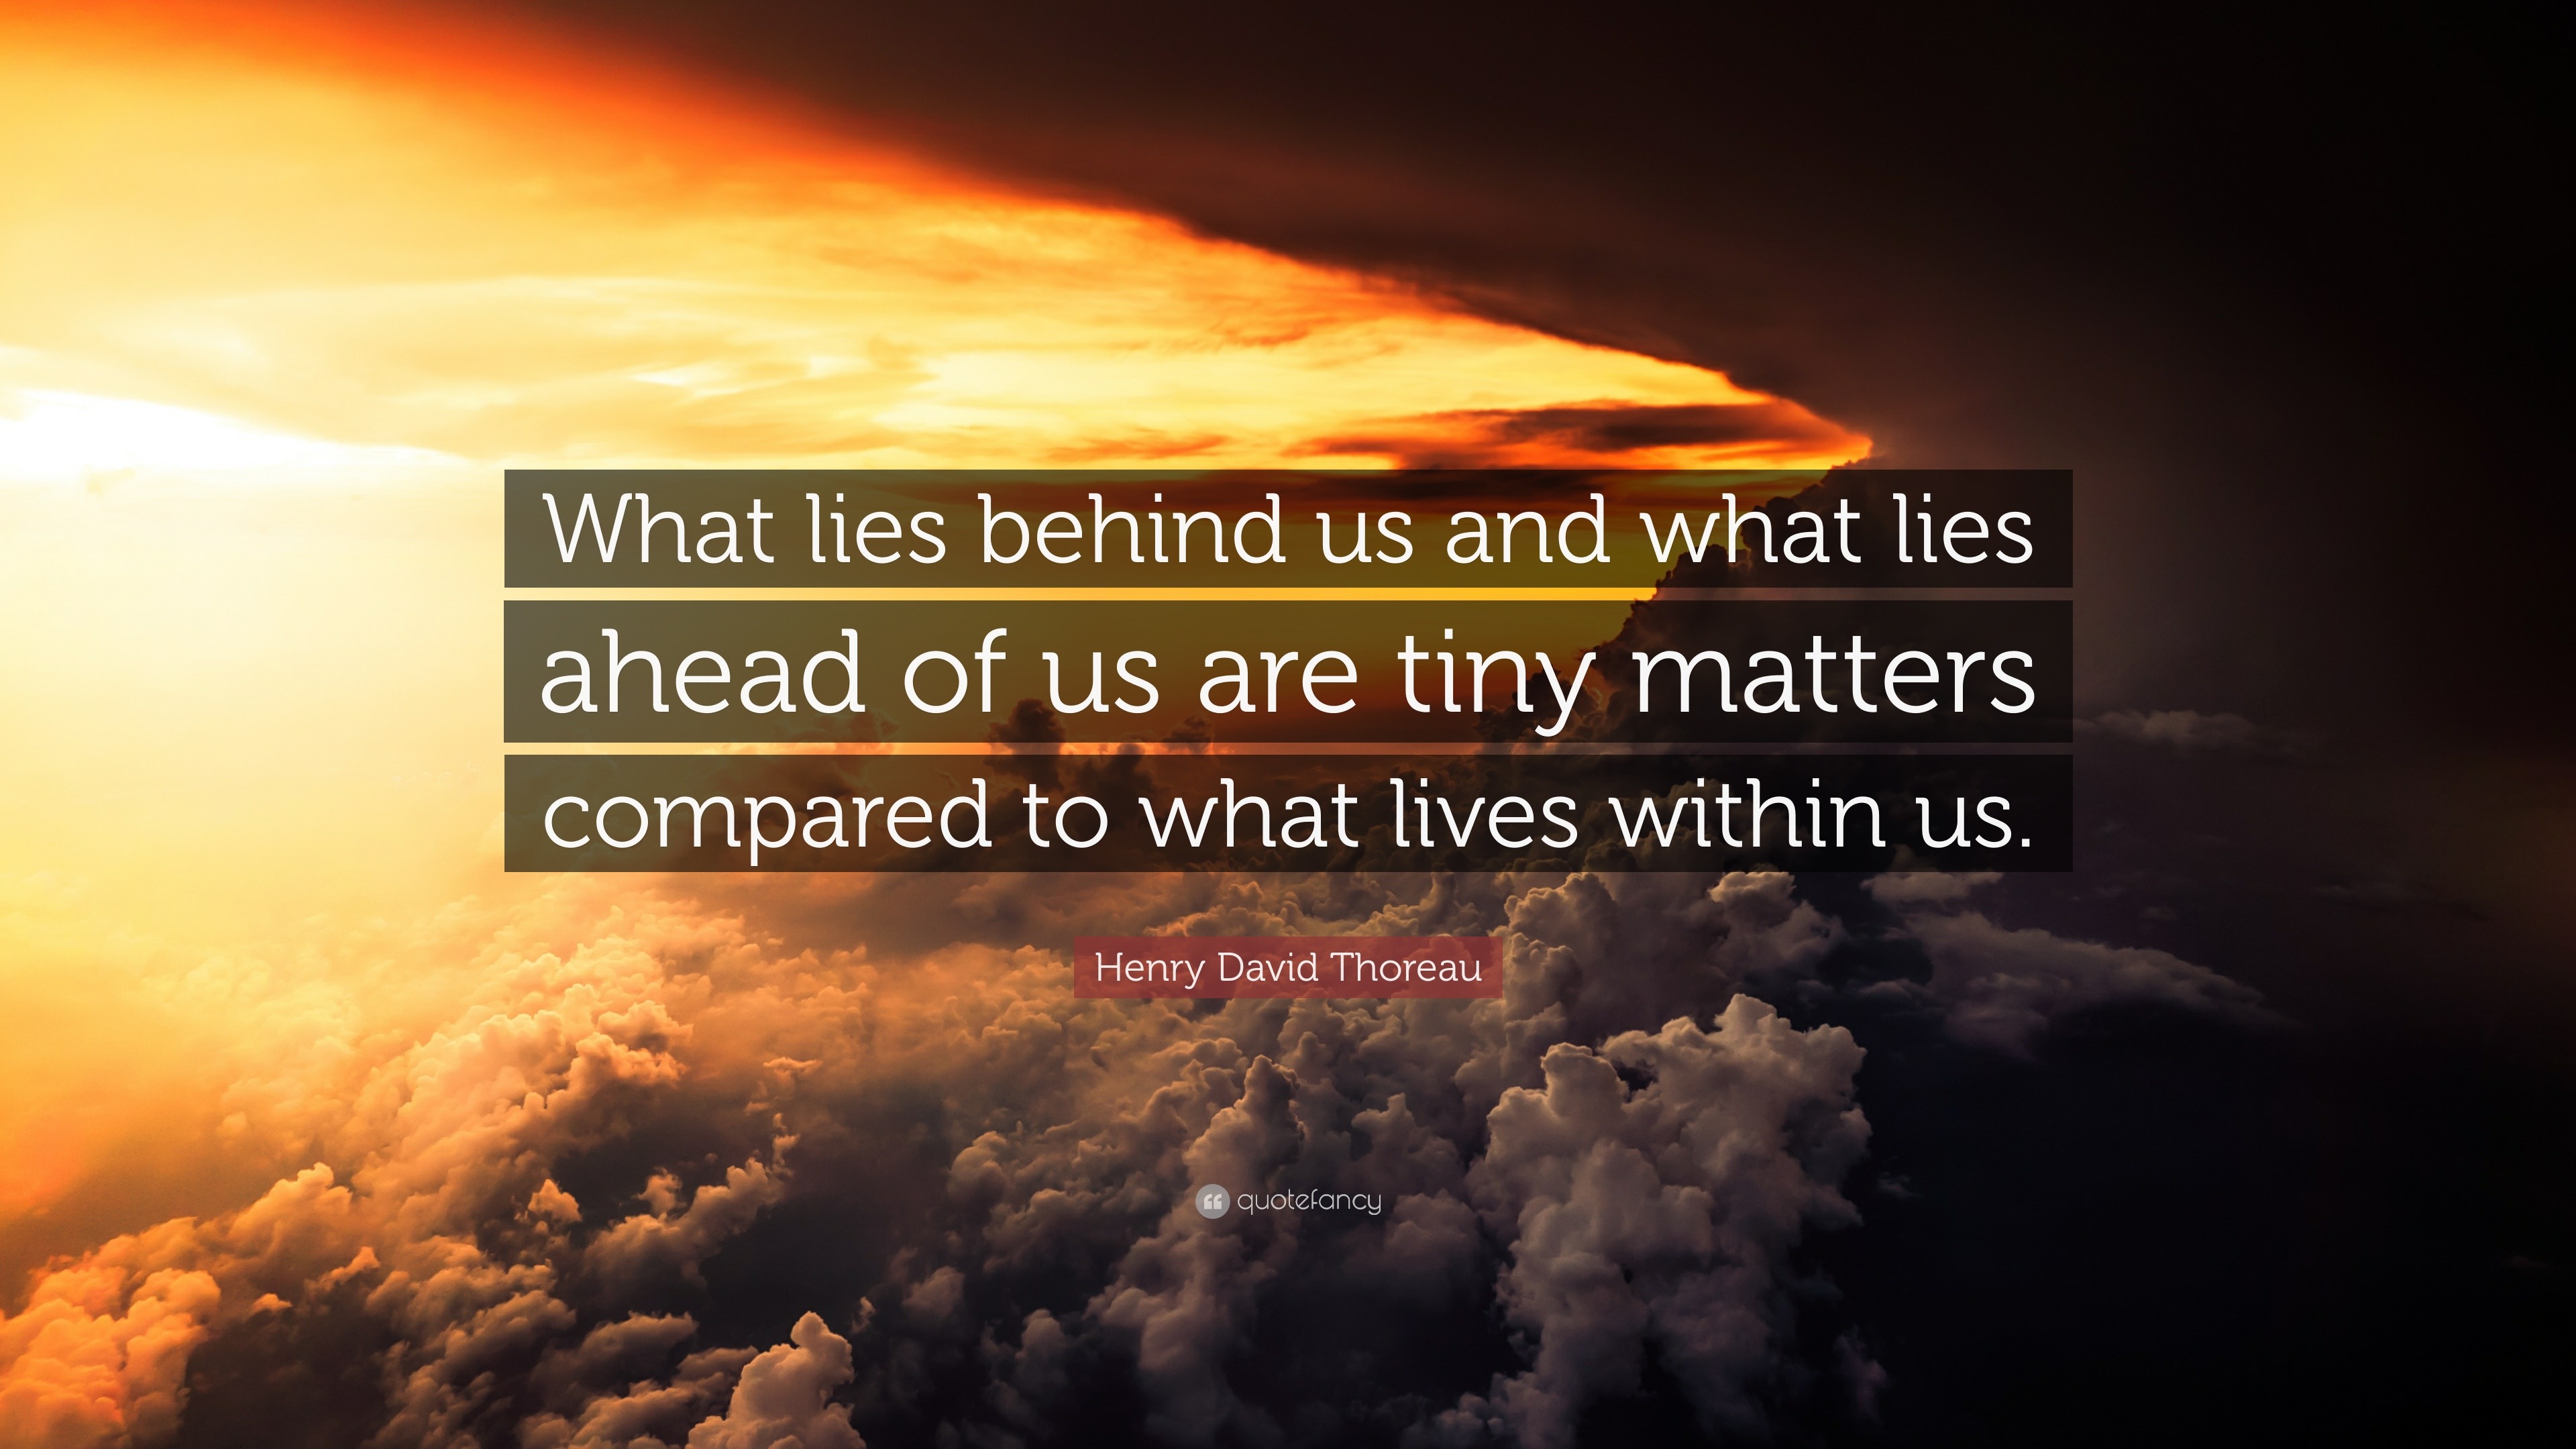 Henry David Thoreau Quote: “What lies behind us and what lies ahead of